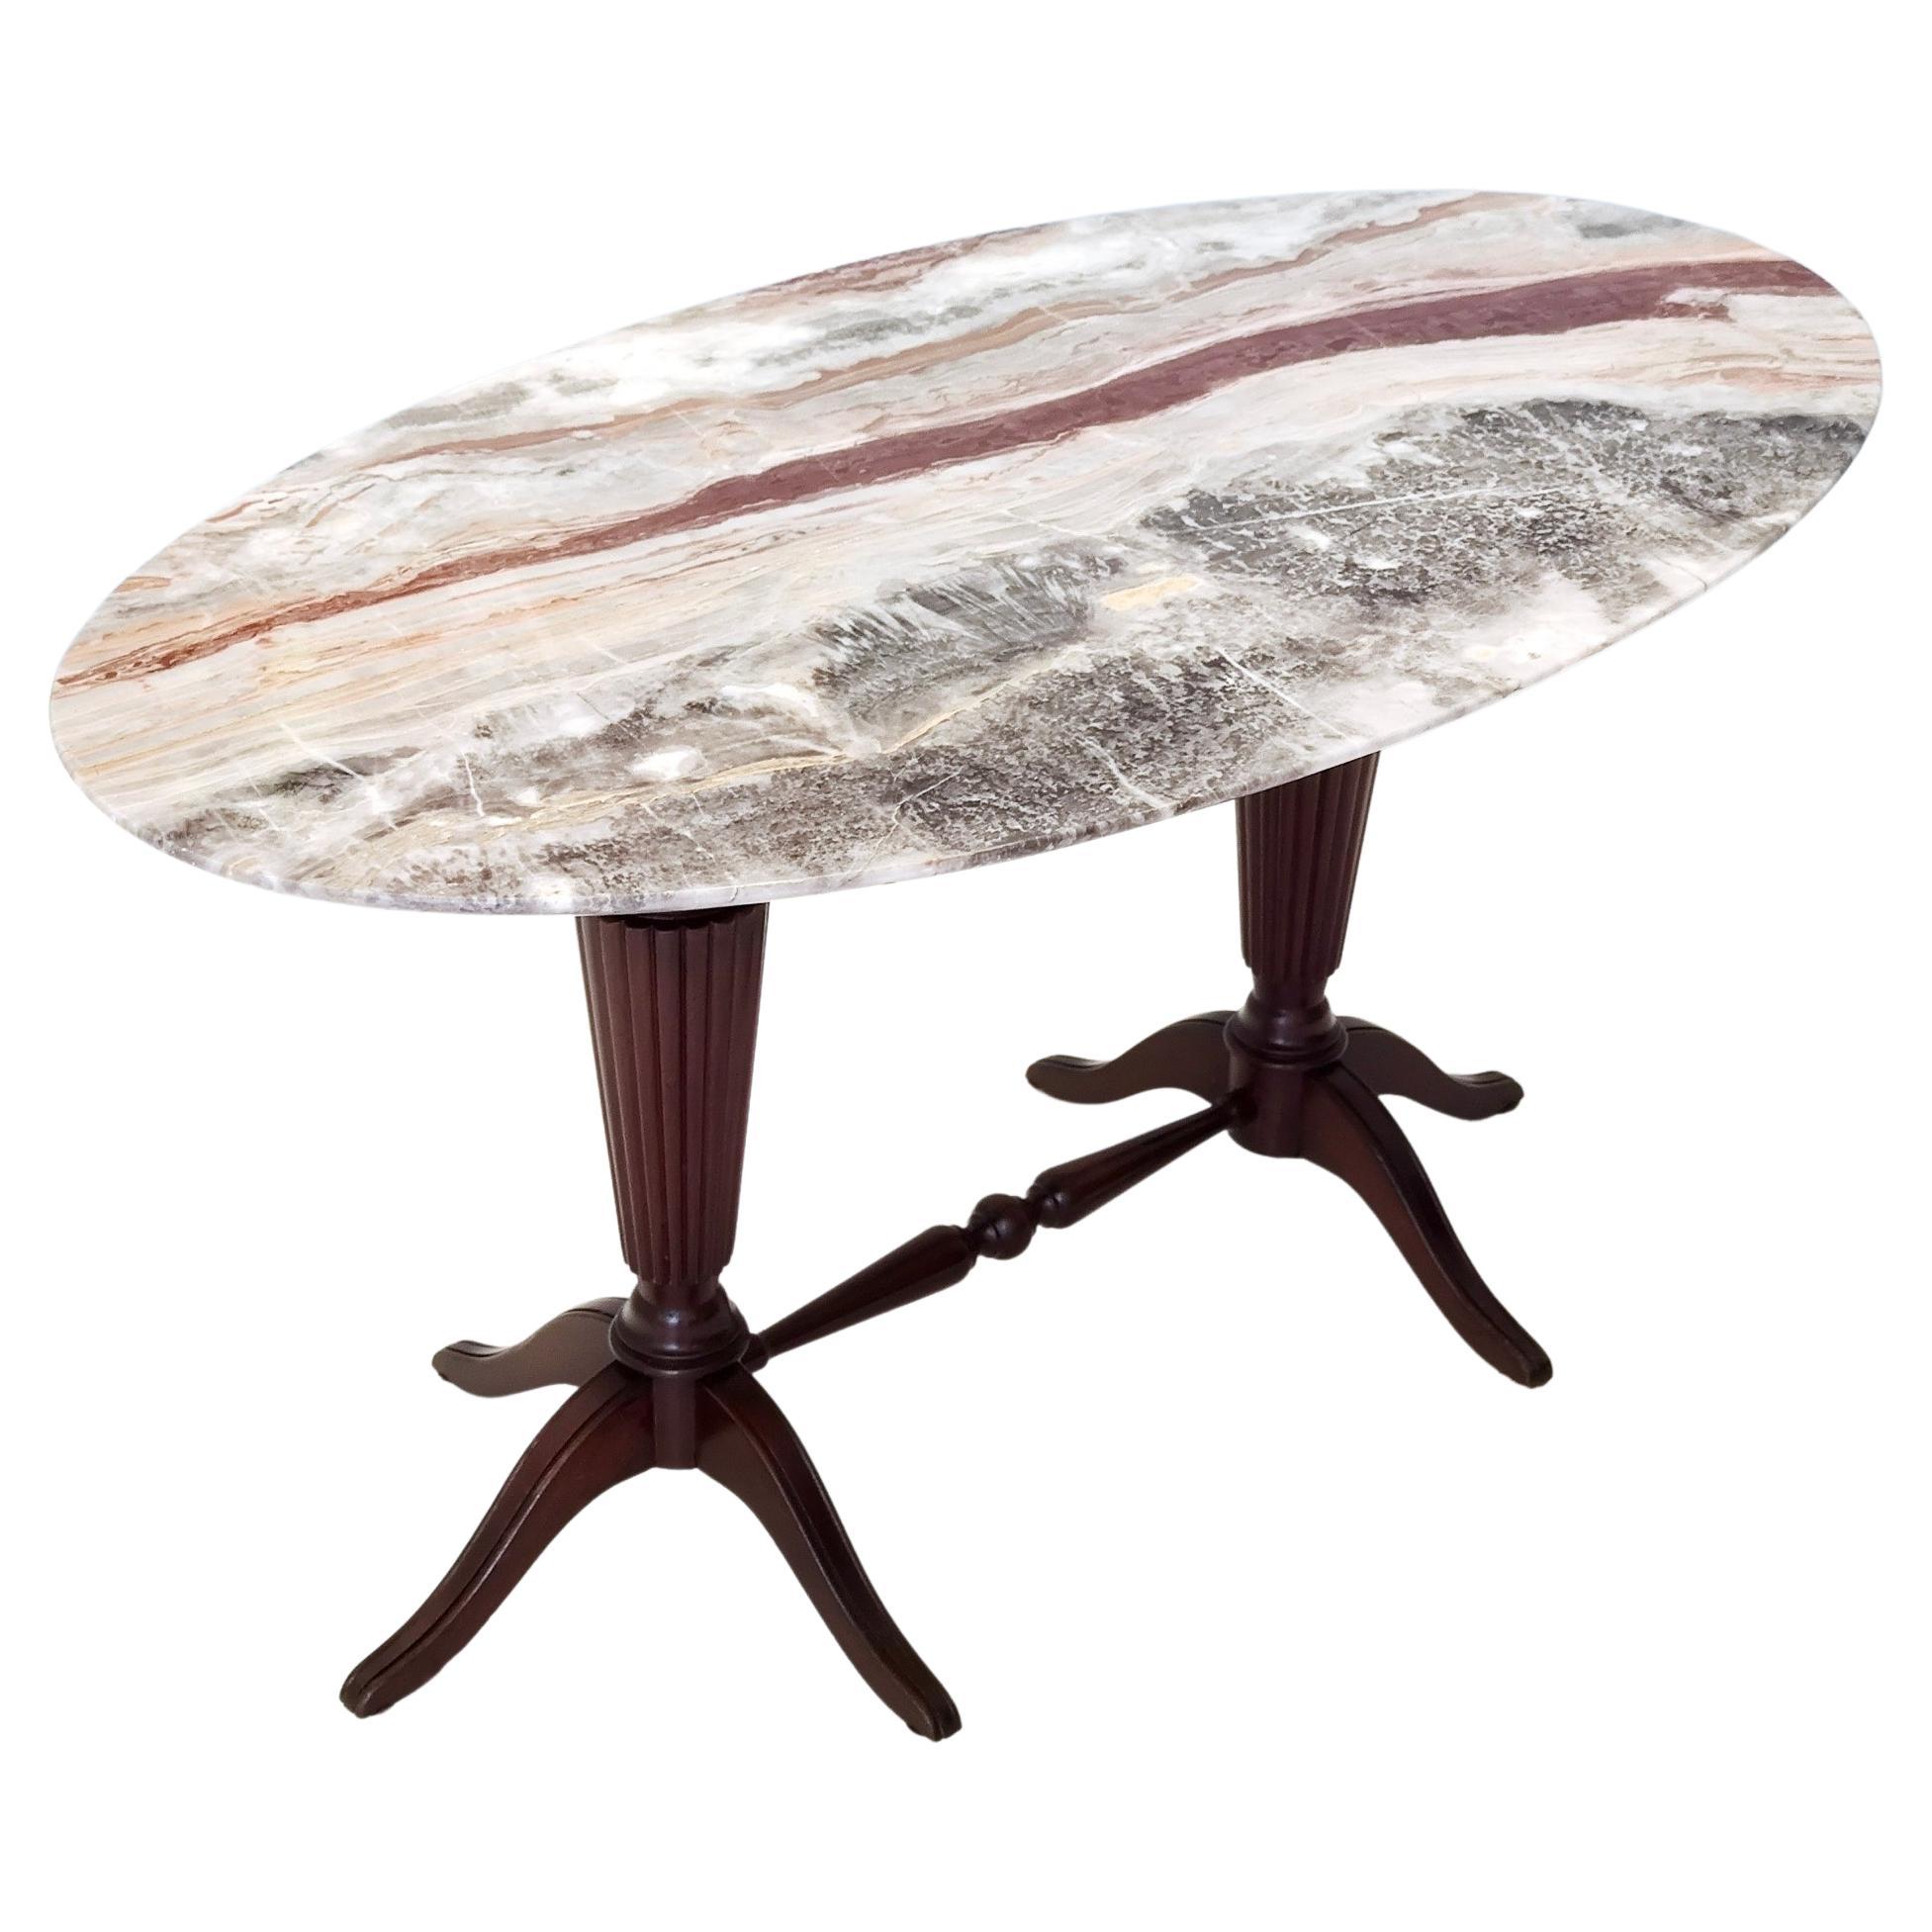 Vintage Beech Coffee Table Ascribable to Paolo Buffa with an Oval Red Onyx Top